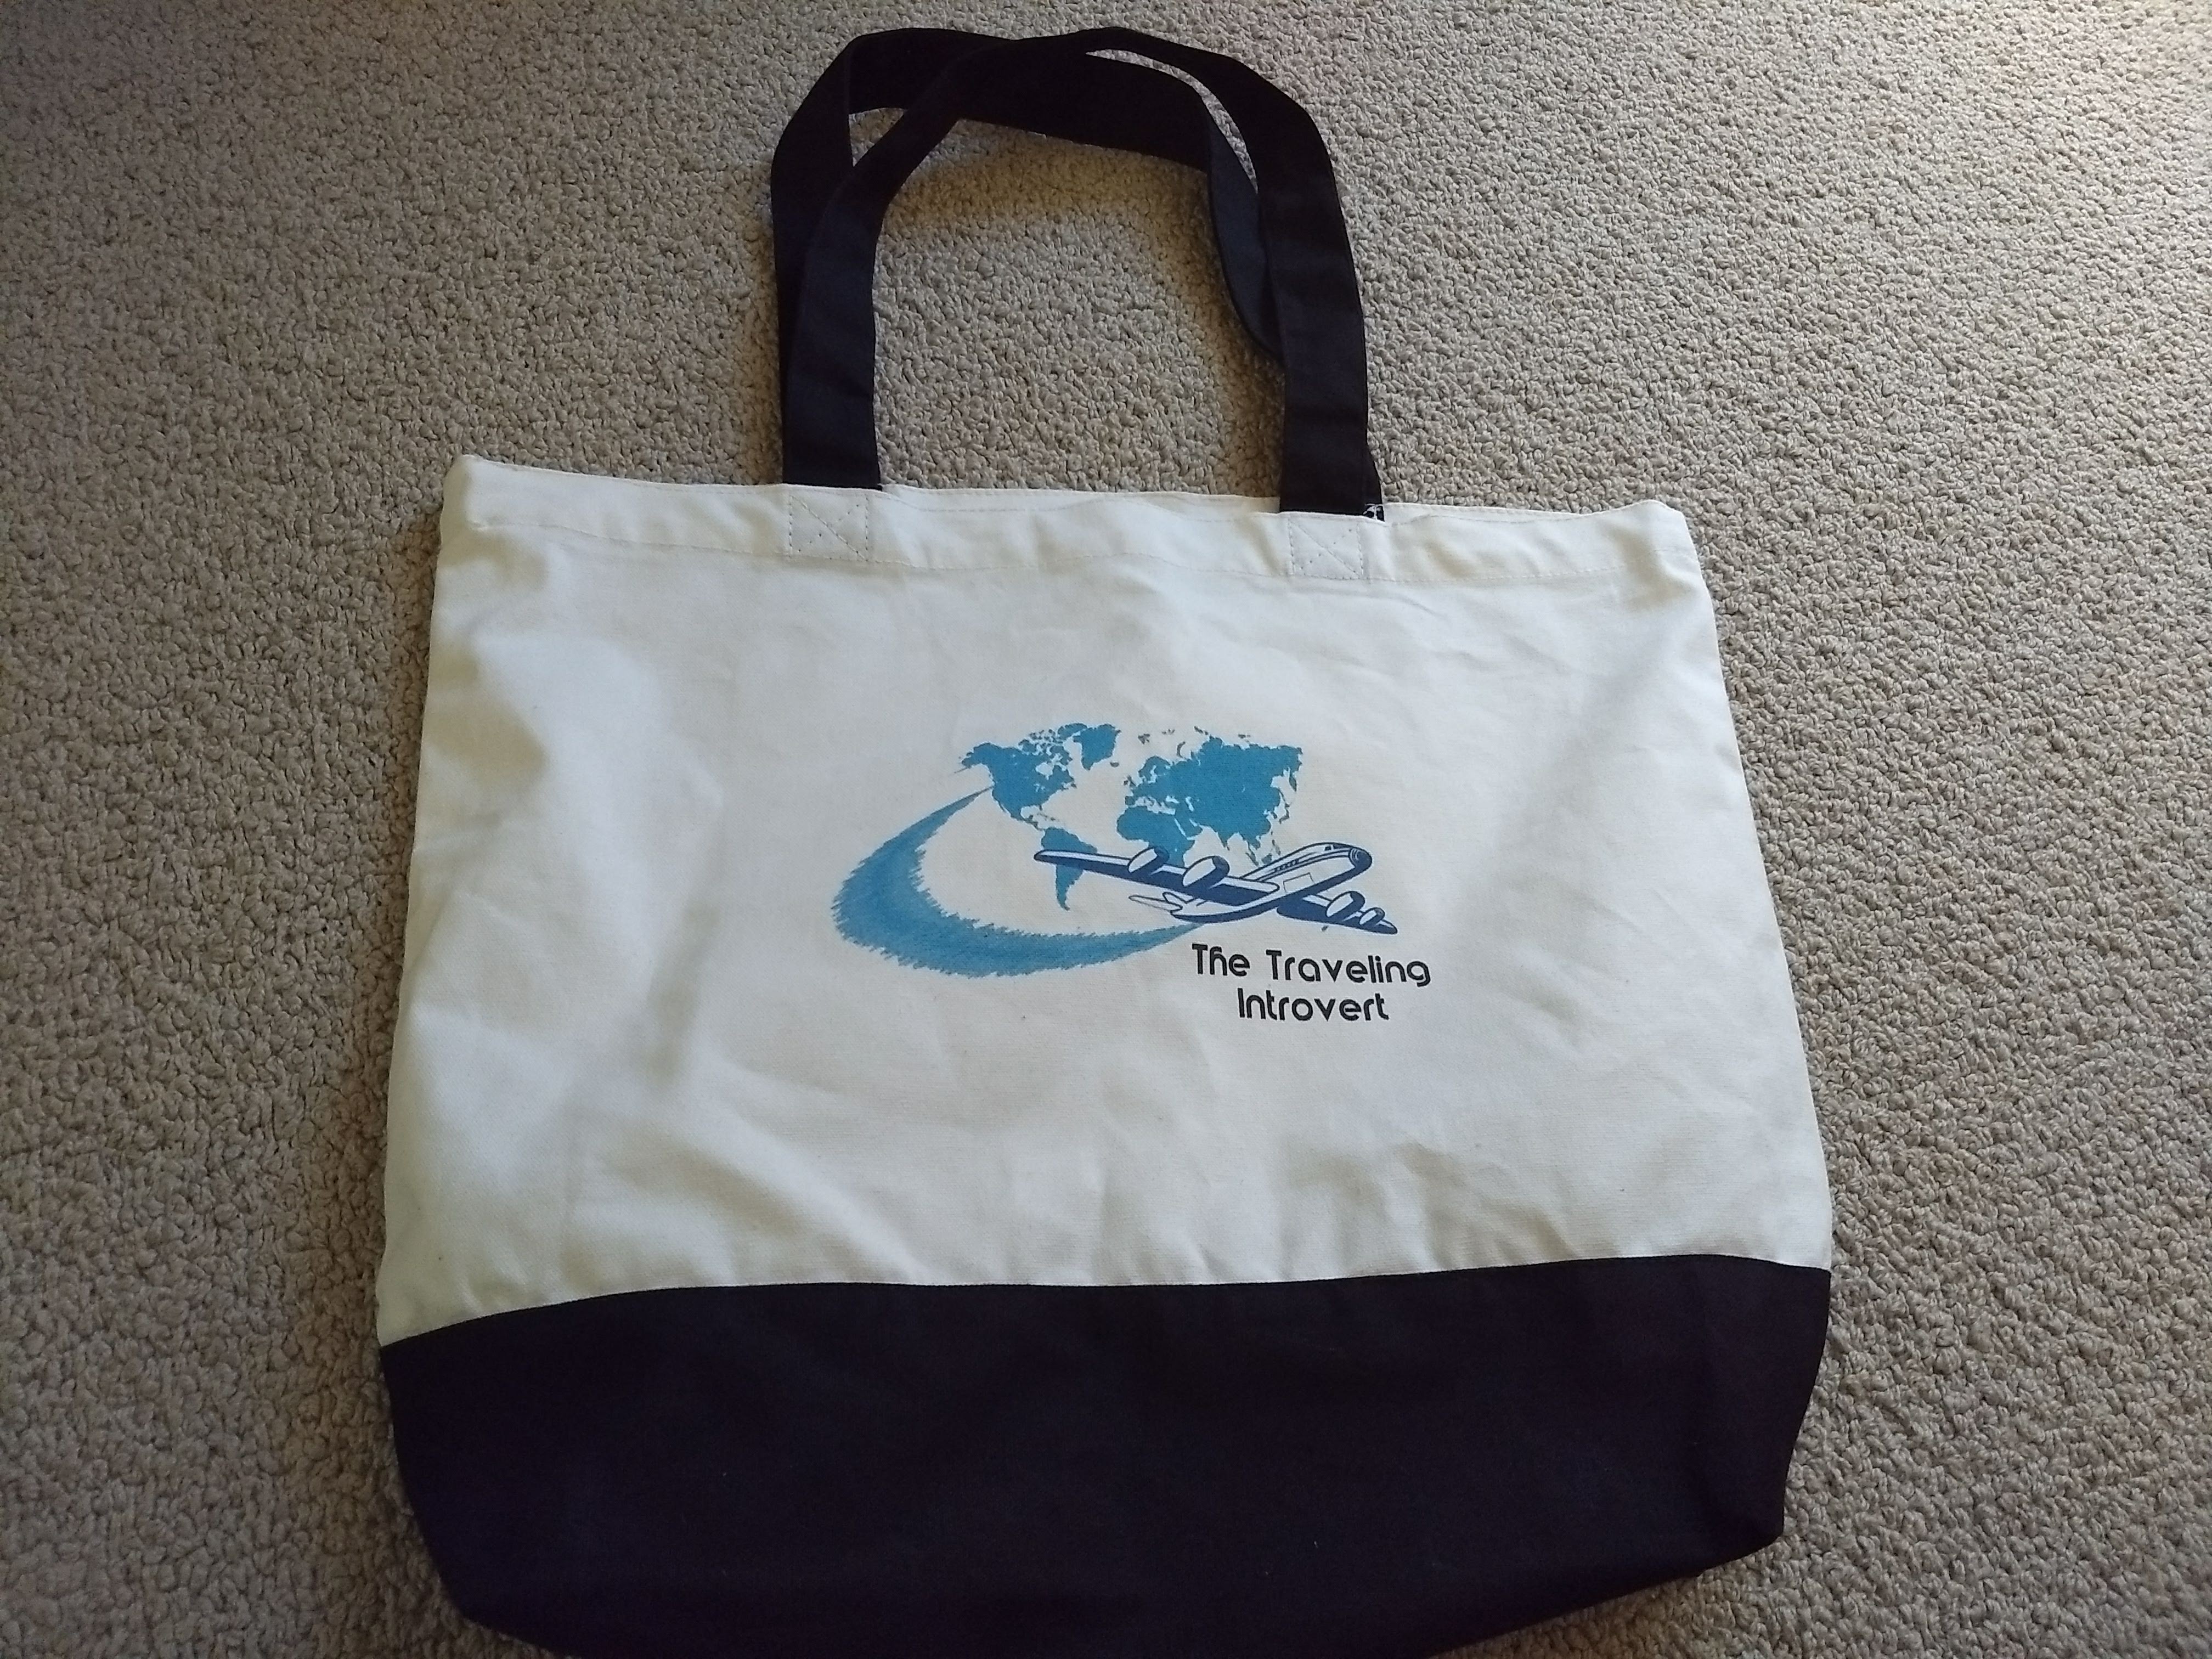 The Traveling Introvert tote bag